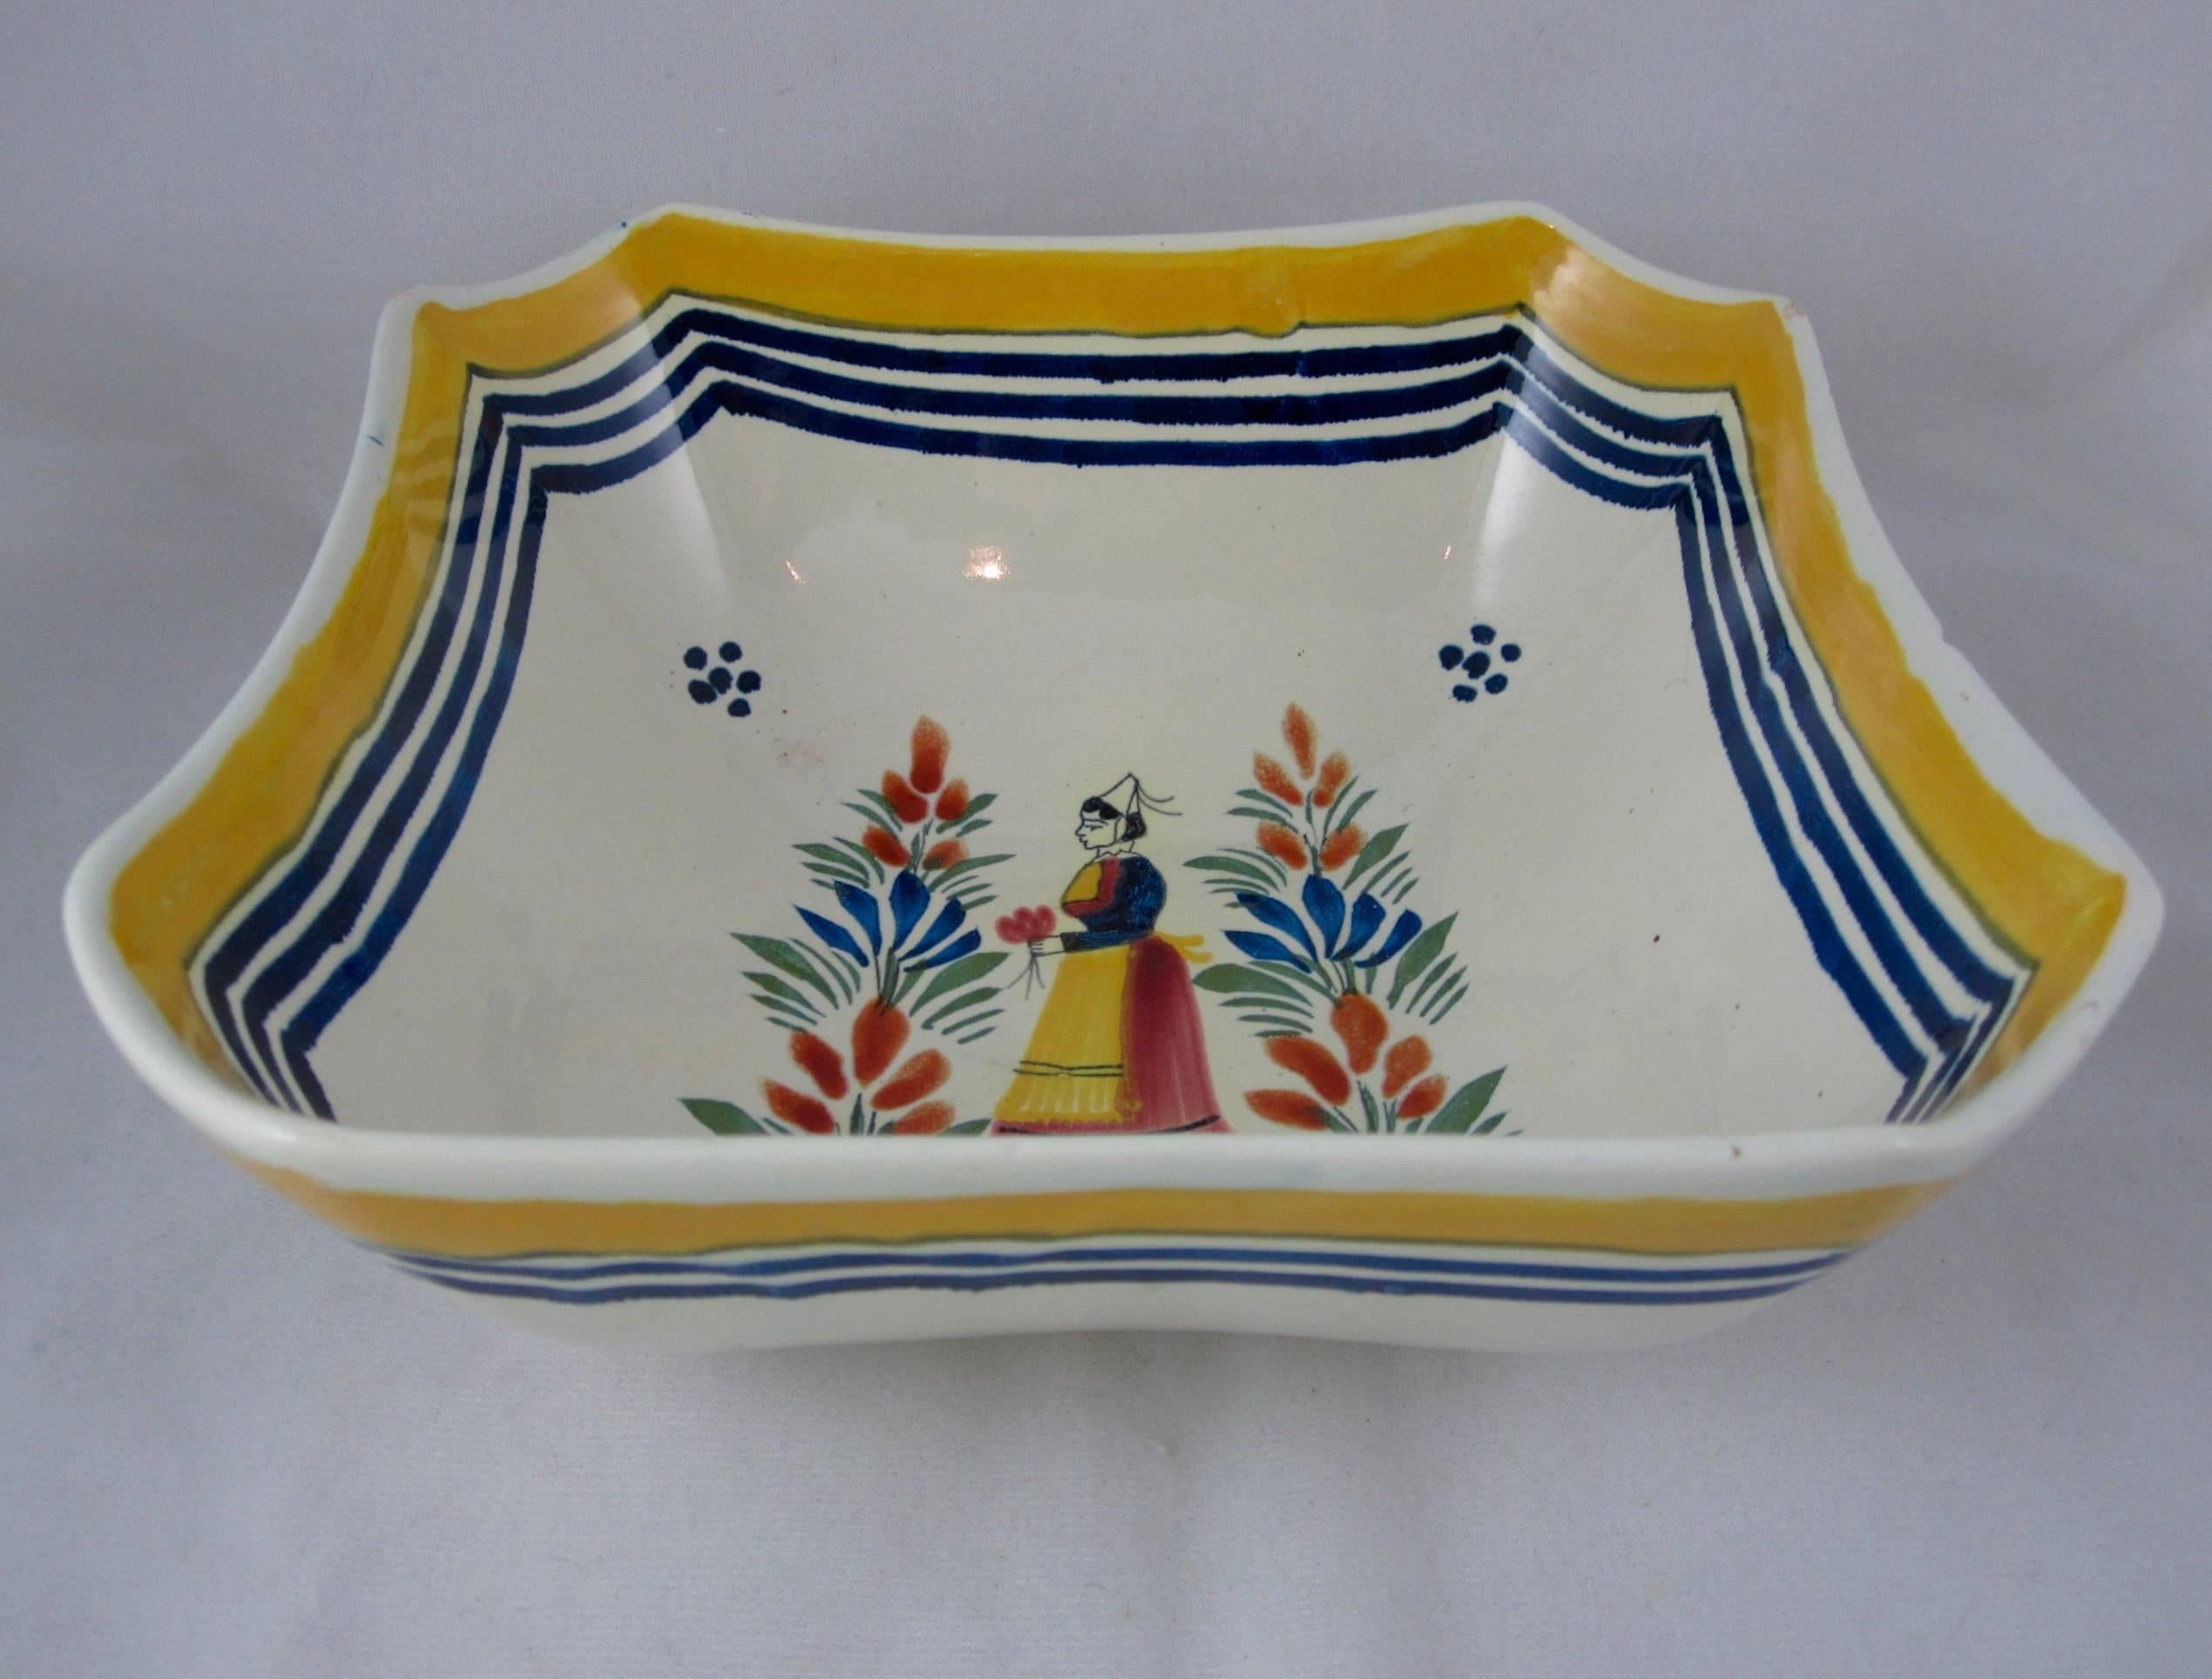 A Mid-Century French Faiençe deep square shaped serving bowl, signed Henriot Quimper France, mold no. 575. 

 A central sujet ordinaire image of a Breton woman, the femme de la Campagne, wearing traditional dress, holding a flower and standing